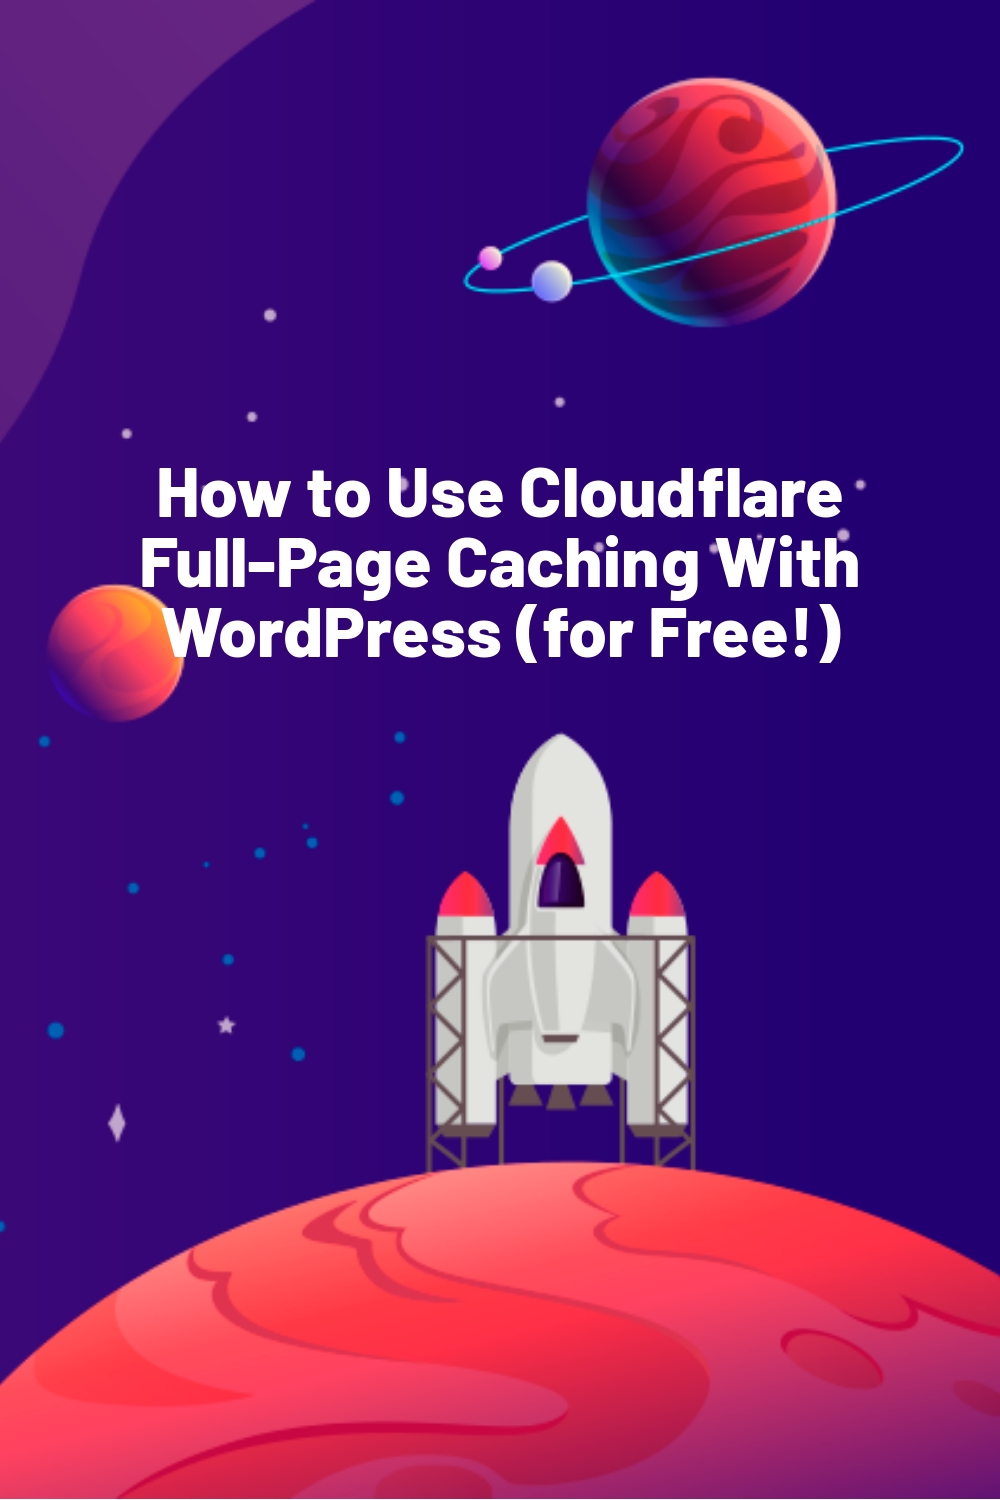 How to Use Cloudflare Full-Page Caching With WordPress (for Free!)